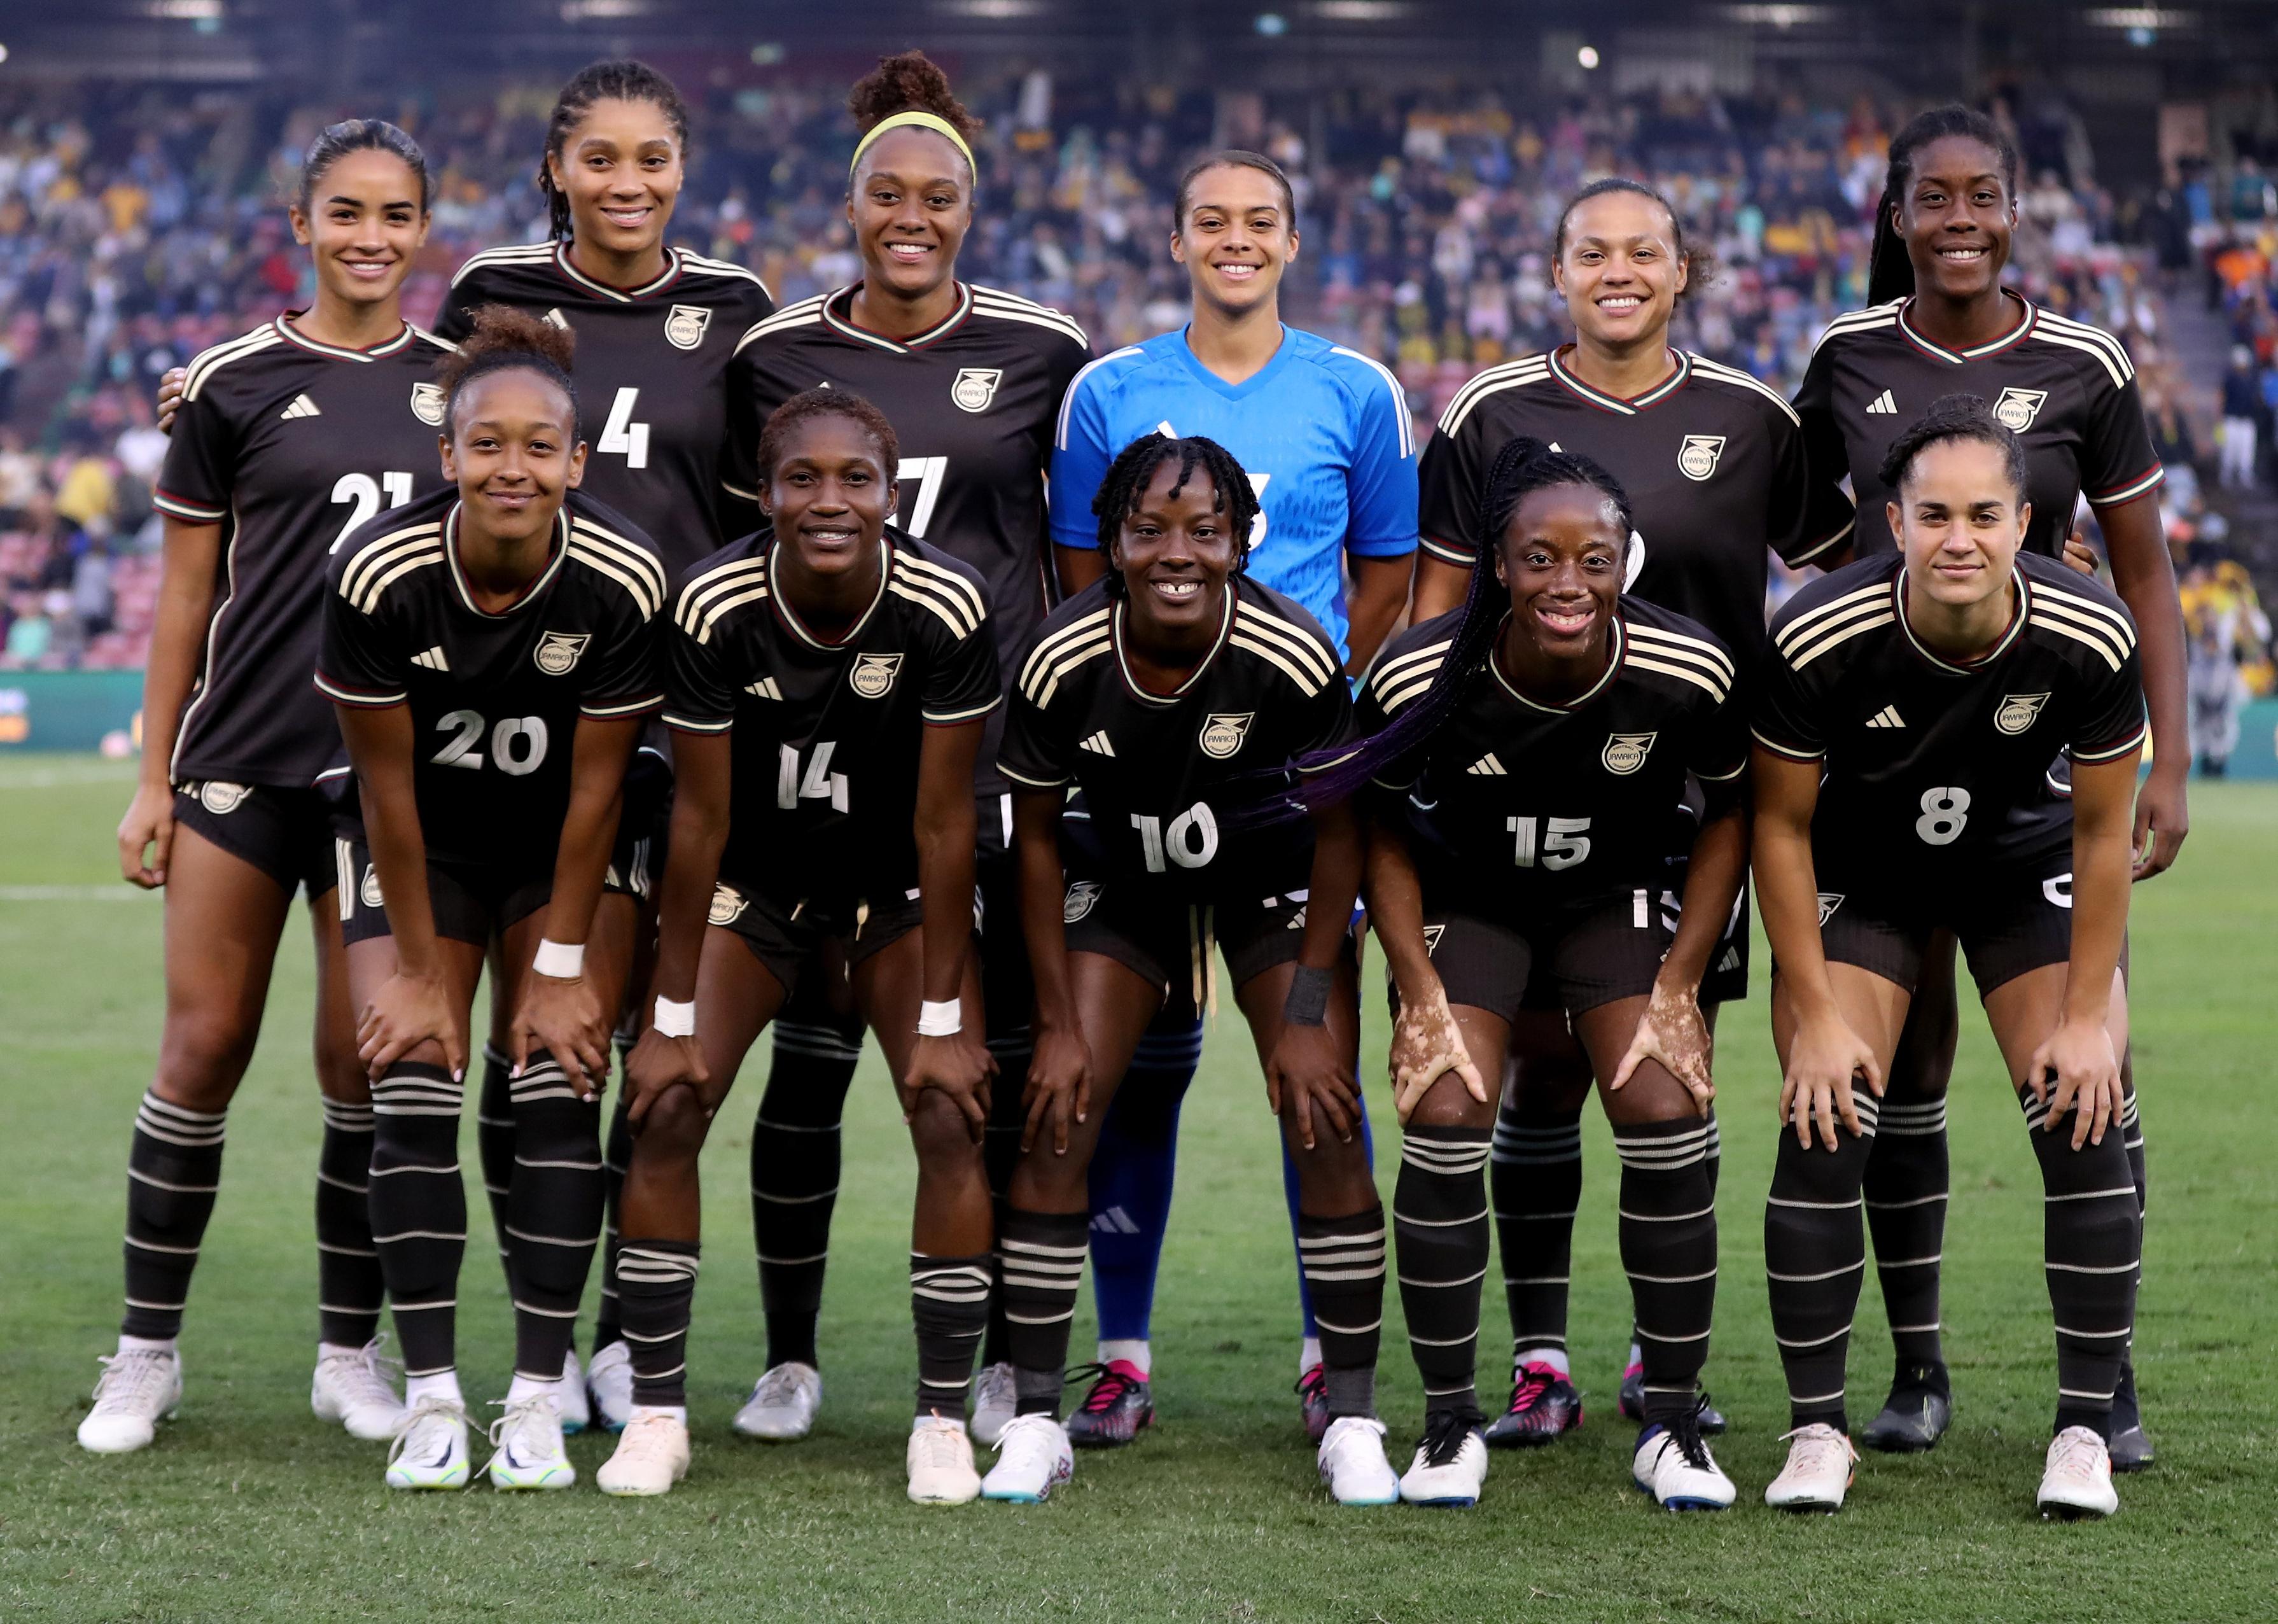 Players from Jamaica pose for a team photo during the Cup of Nations match between the Australia Matildas and Jamaica.